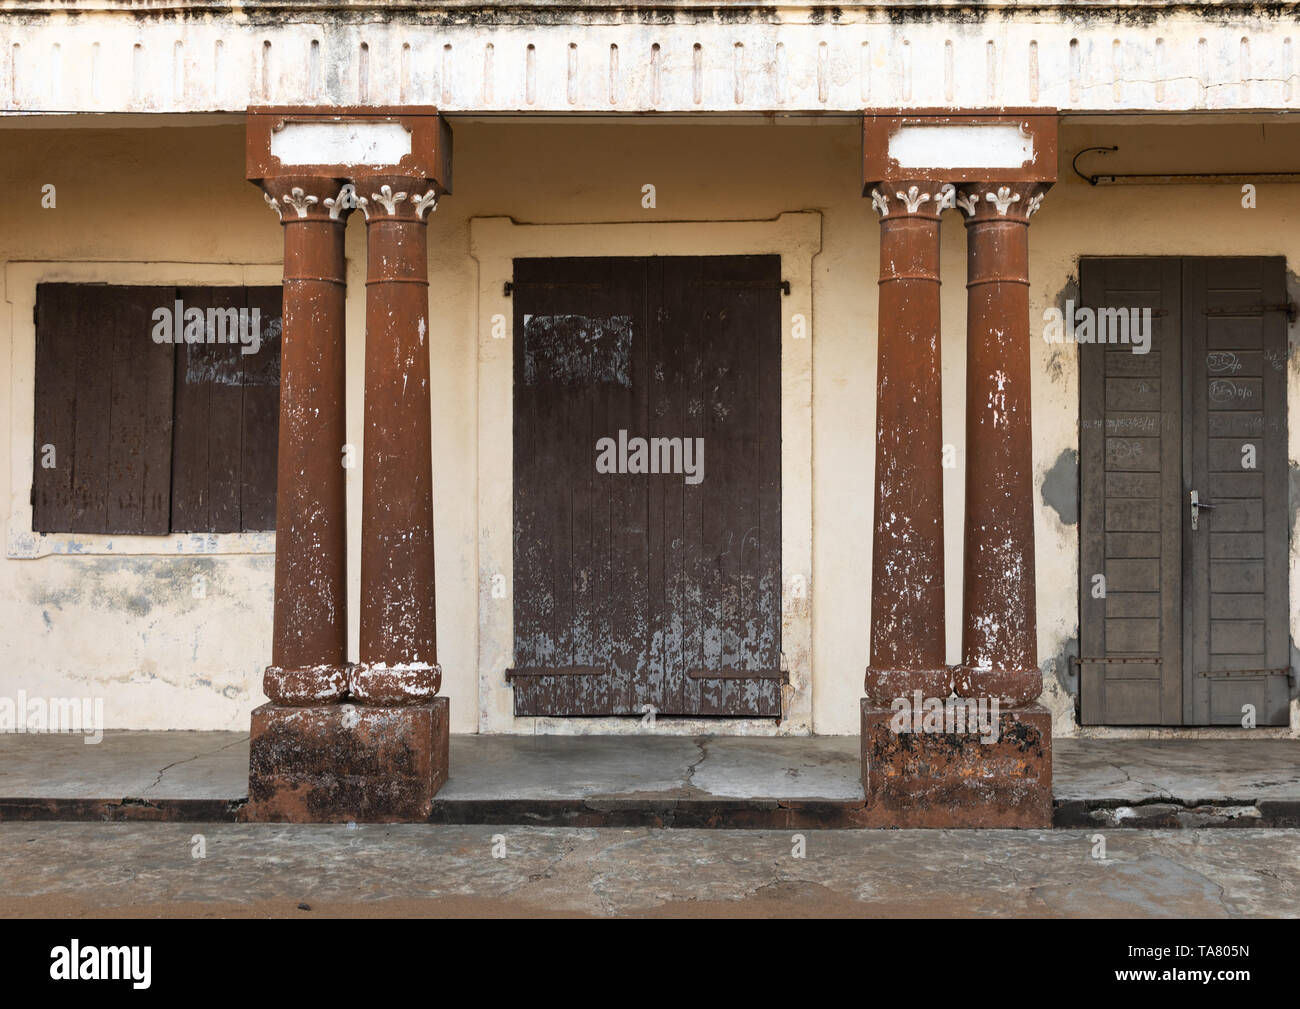 Old french colonial building in the UNESCO world heritage area, Sud-Comoé, Grand-Bassam, Ivory Coast Stock Photo